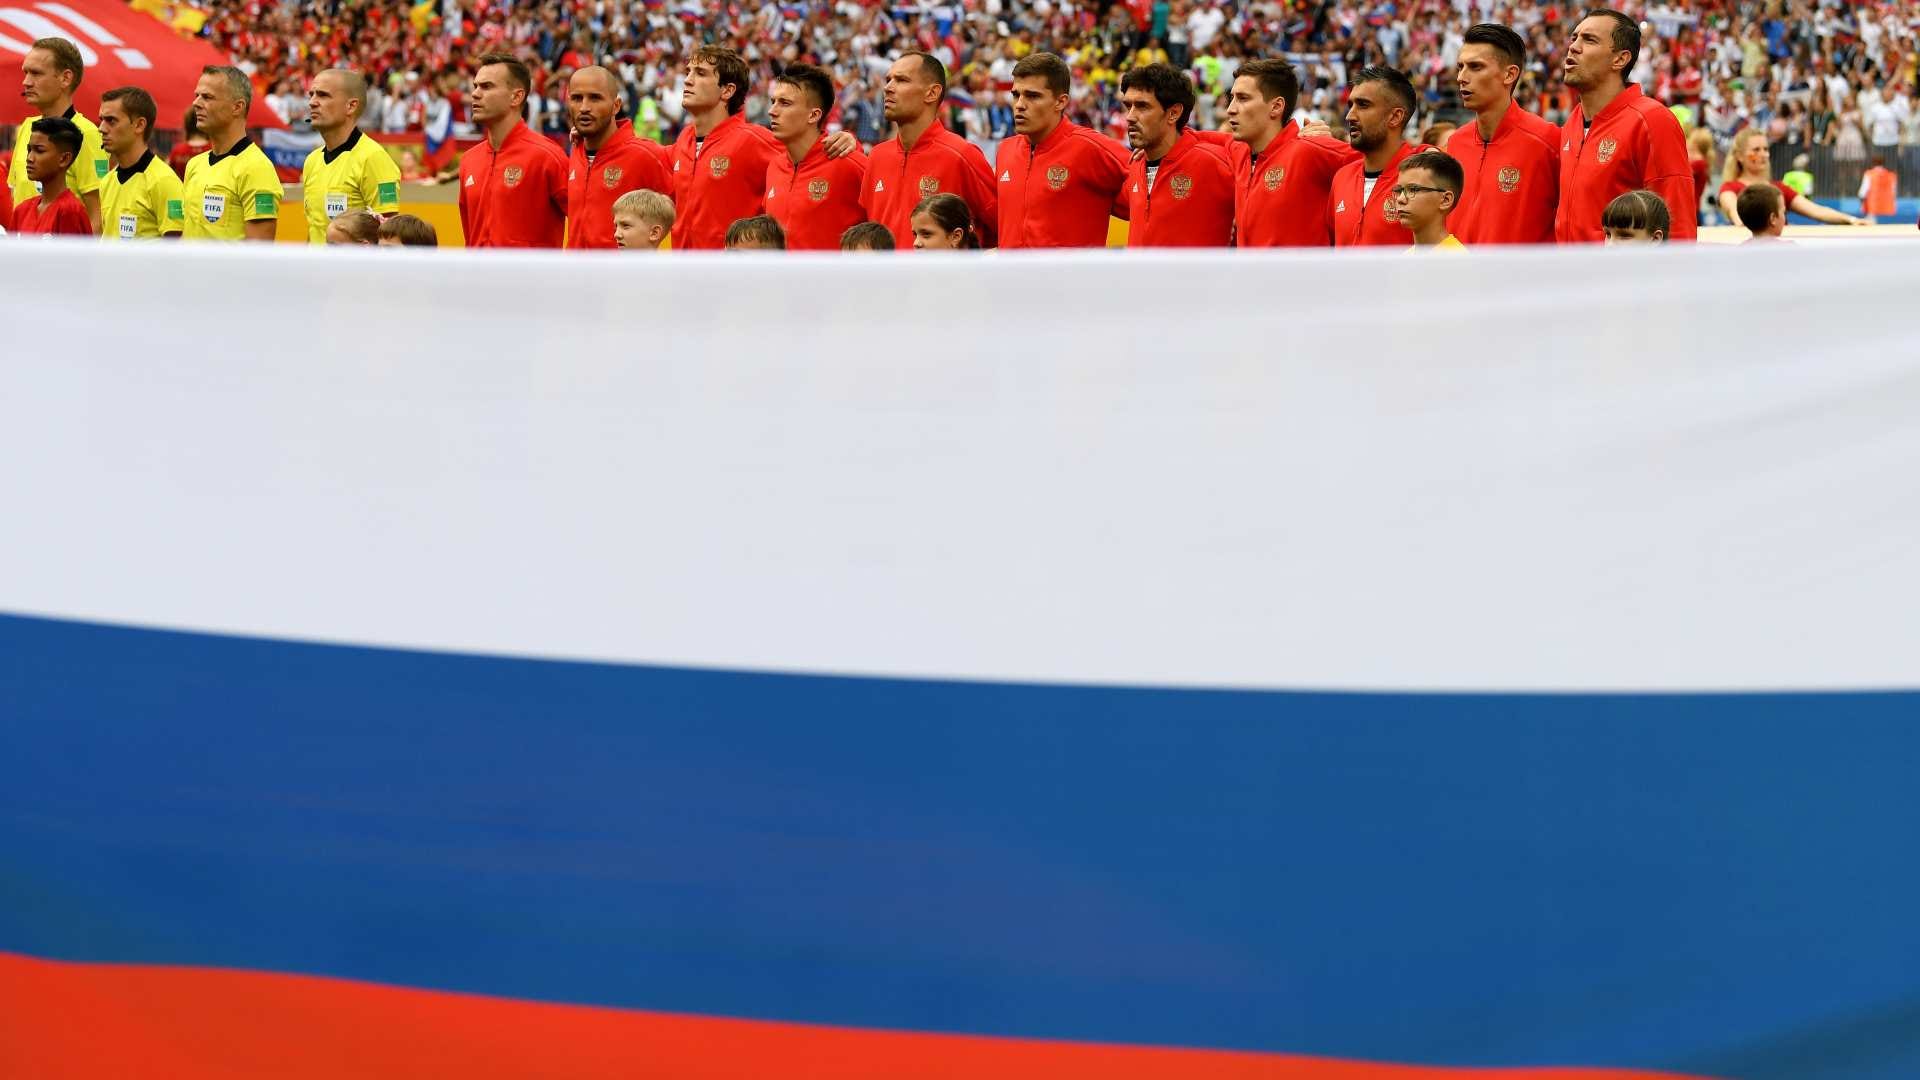 20220228 Russia national team